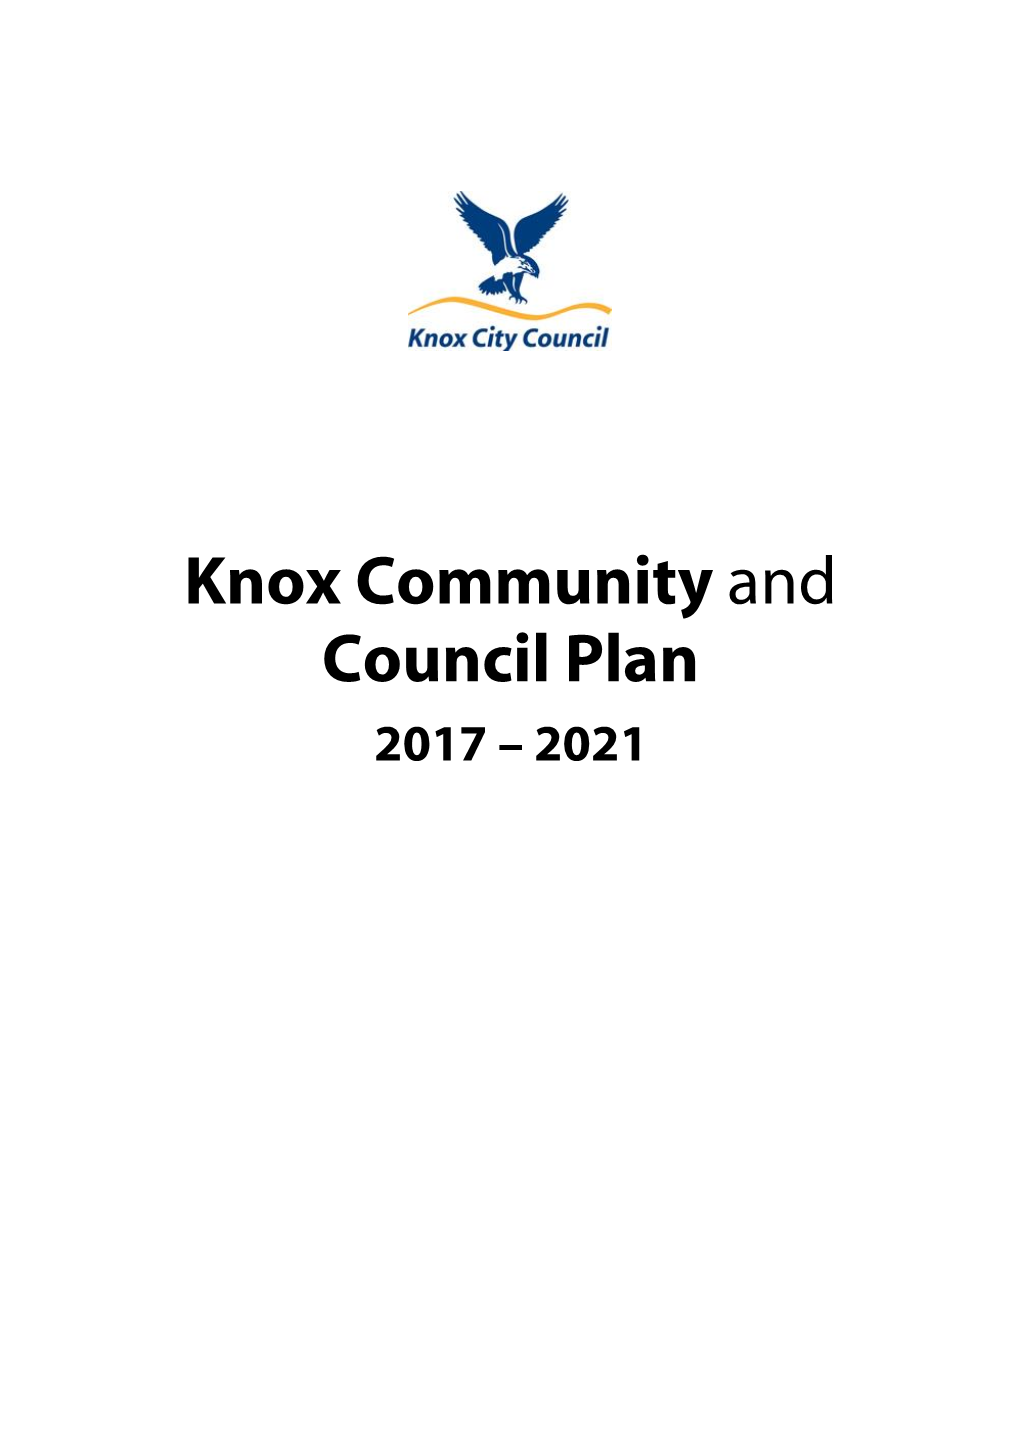 Knox Community and Council Plan 2017-2021